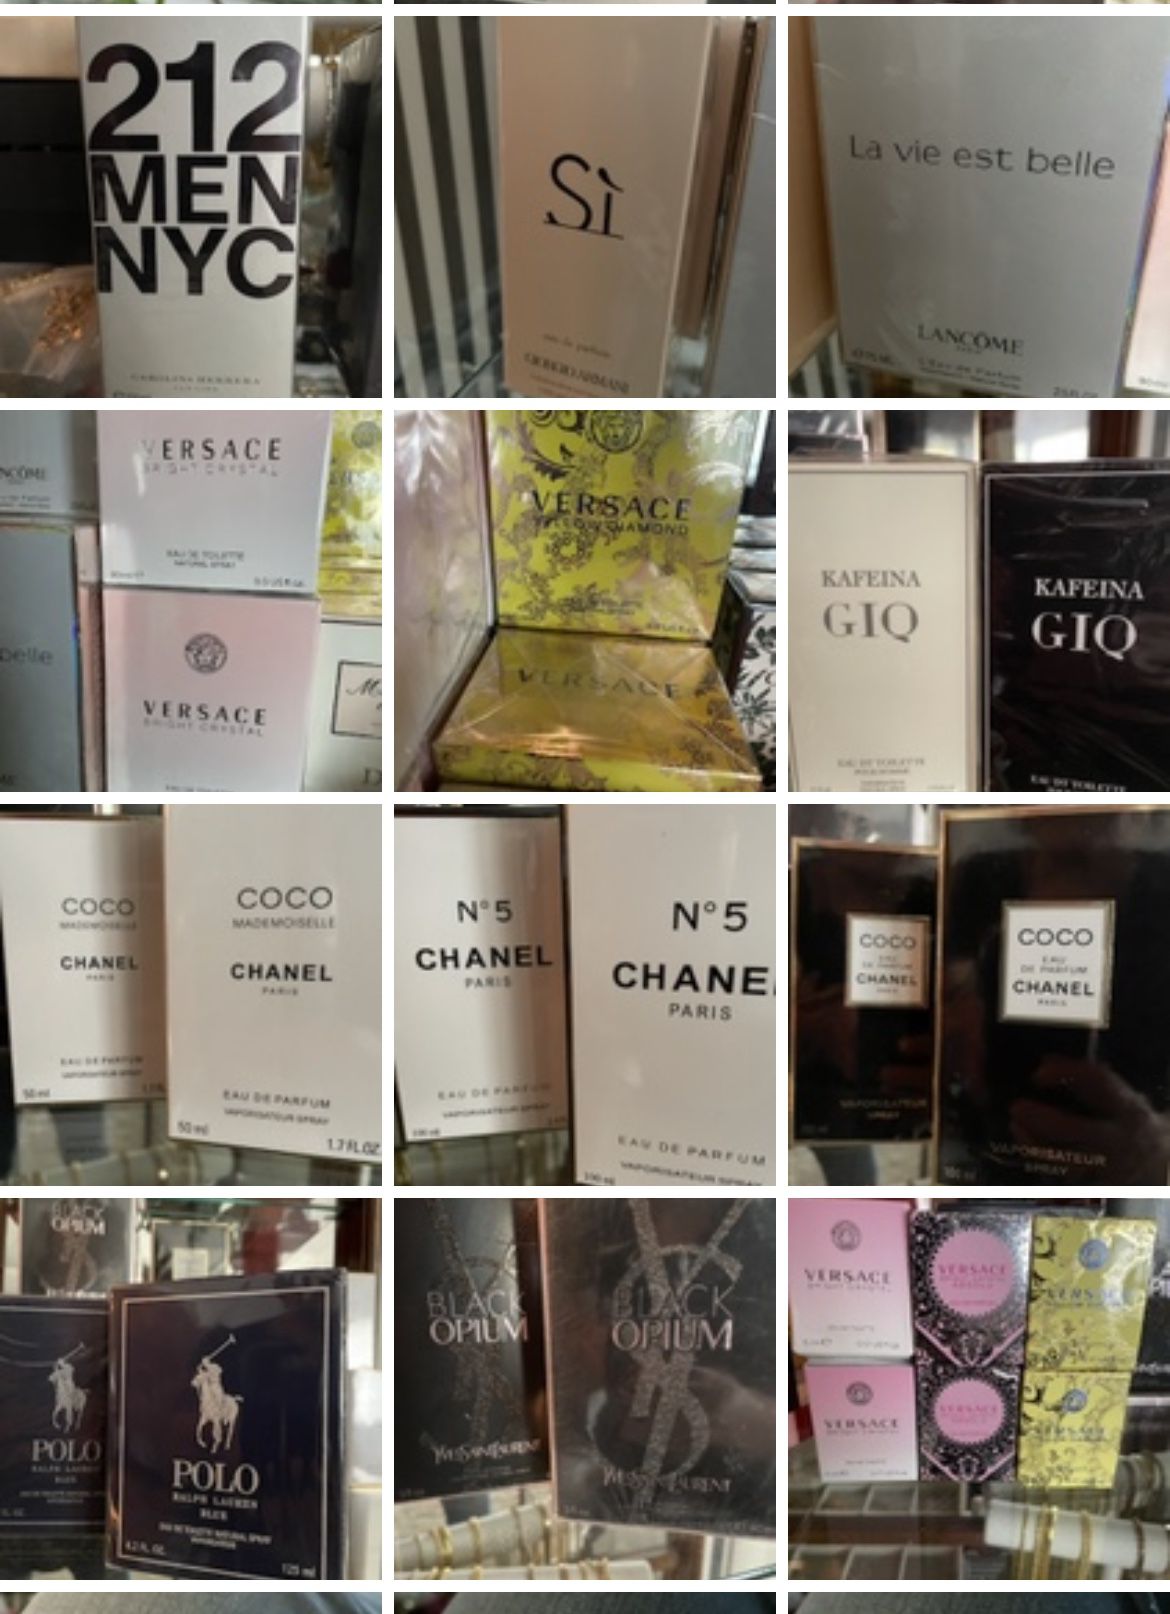 Many Name-brand Women’s Perfumes For Sale .. Versace, Gucci, St.Ives, Lancome, Chanel, Armani